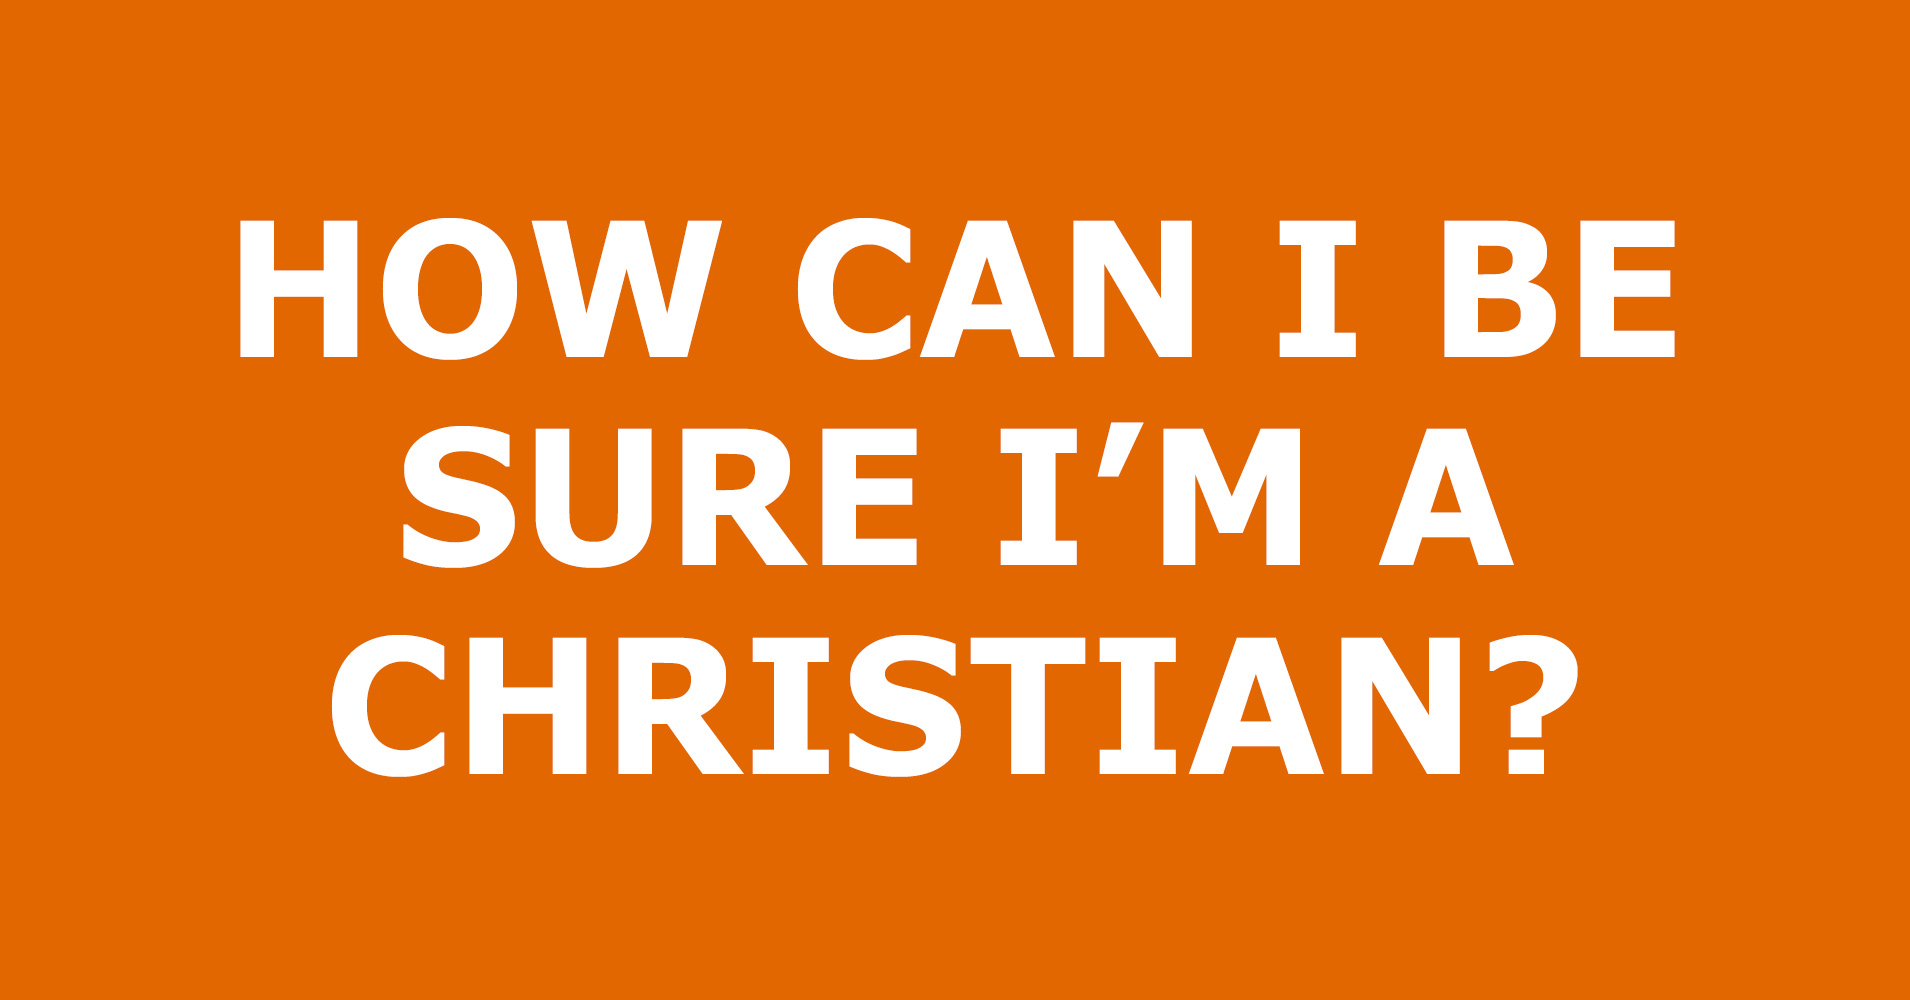 How-Can-I-Be-Sure-I'm-A-Christian.jpg